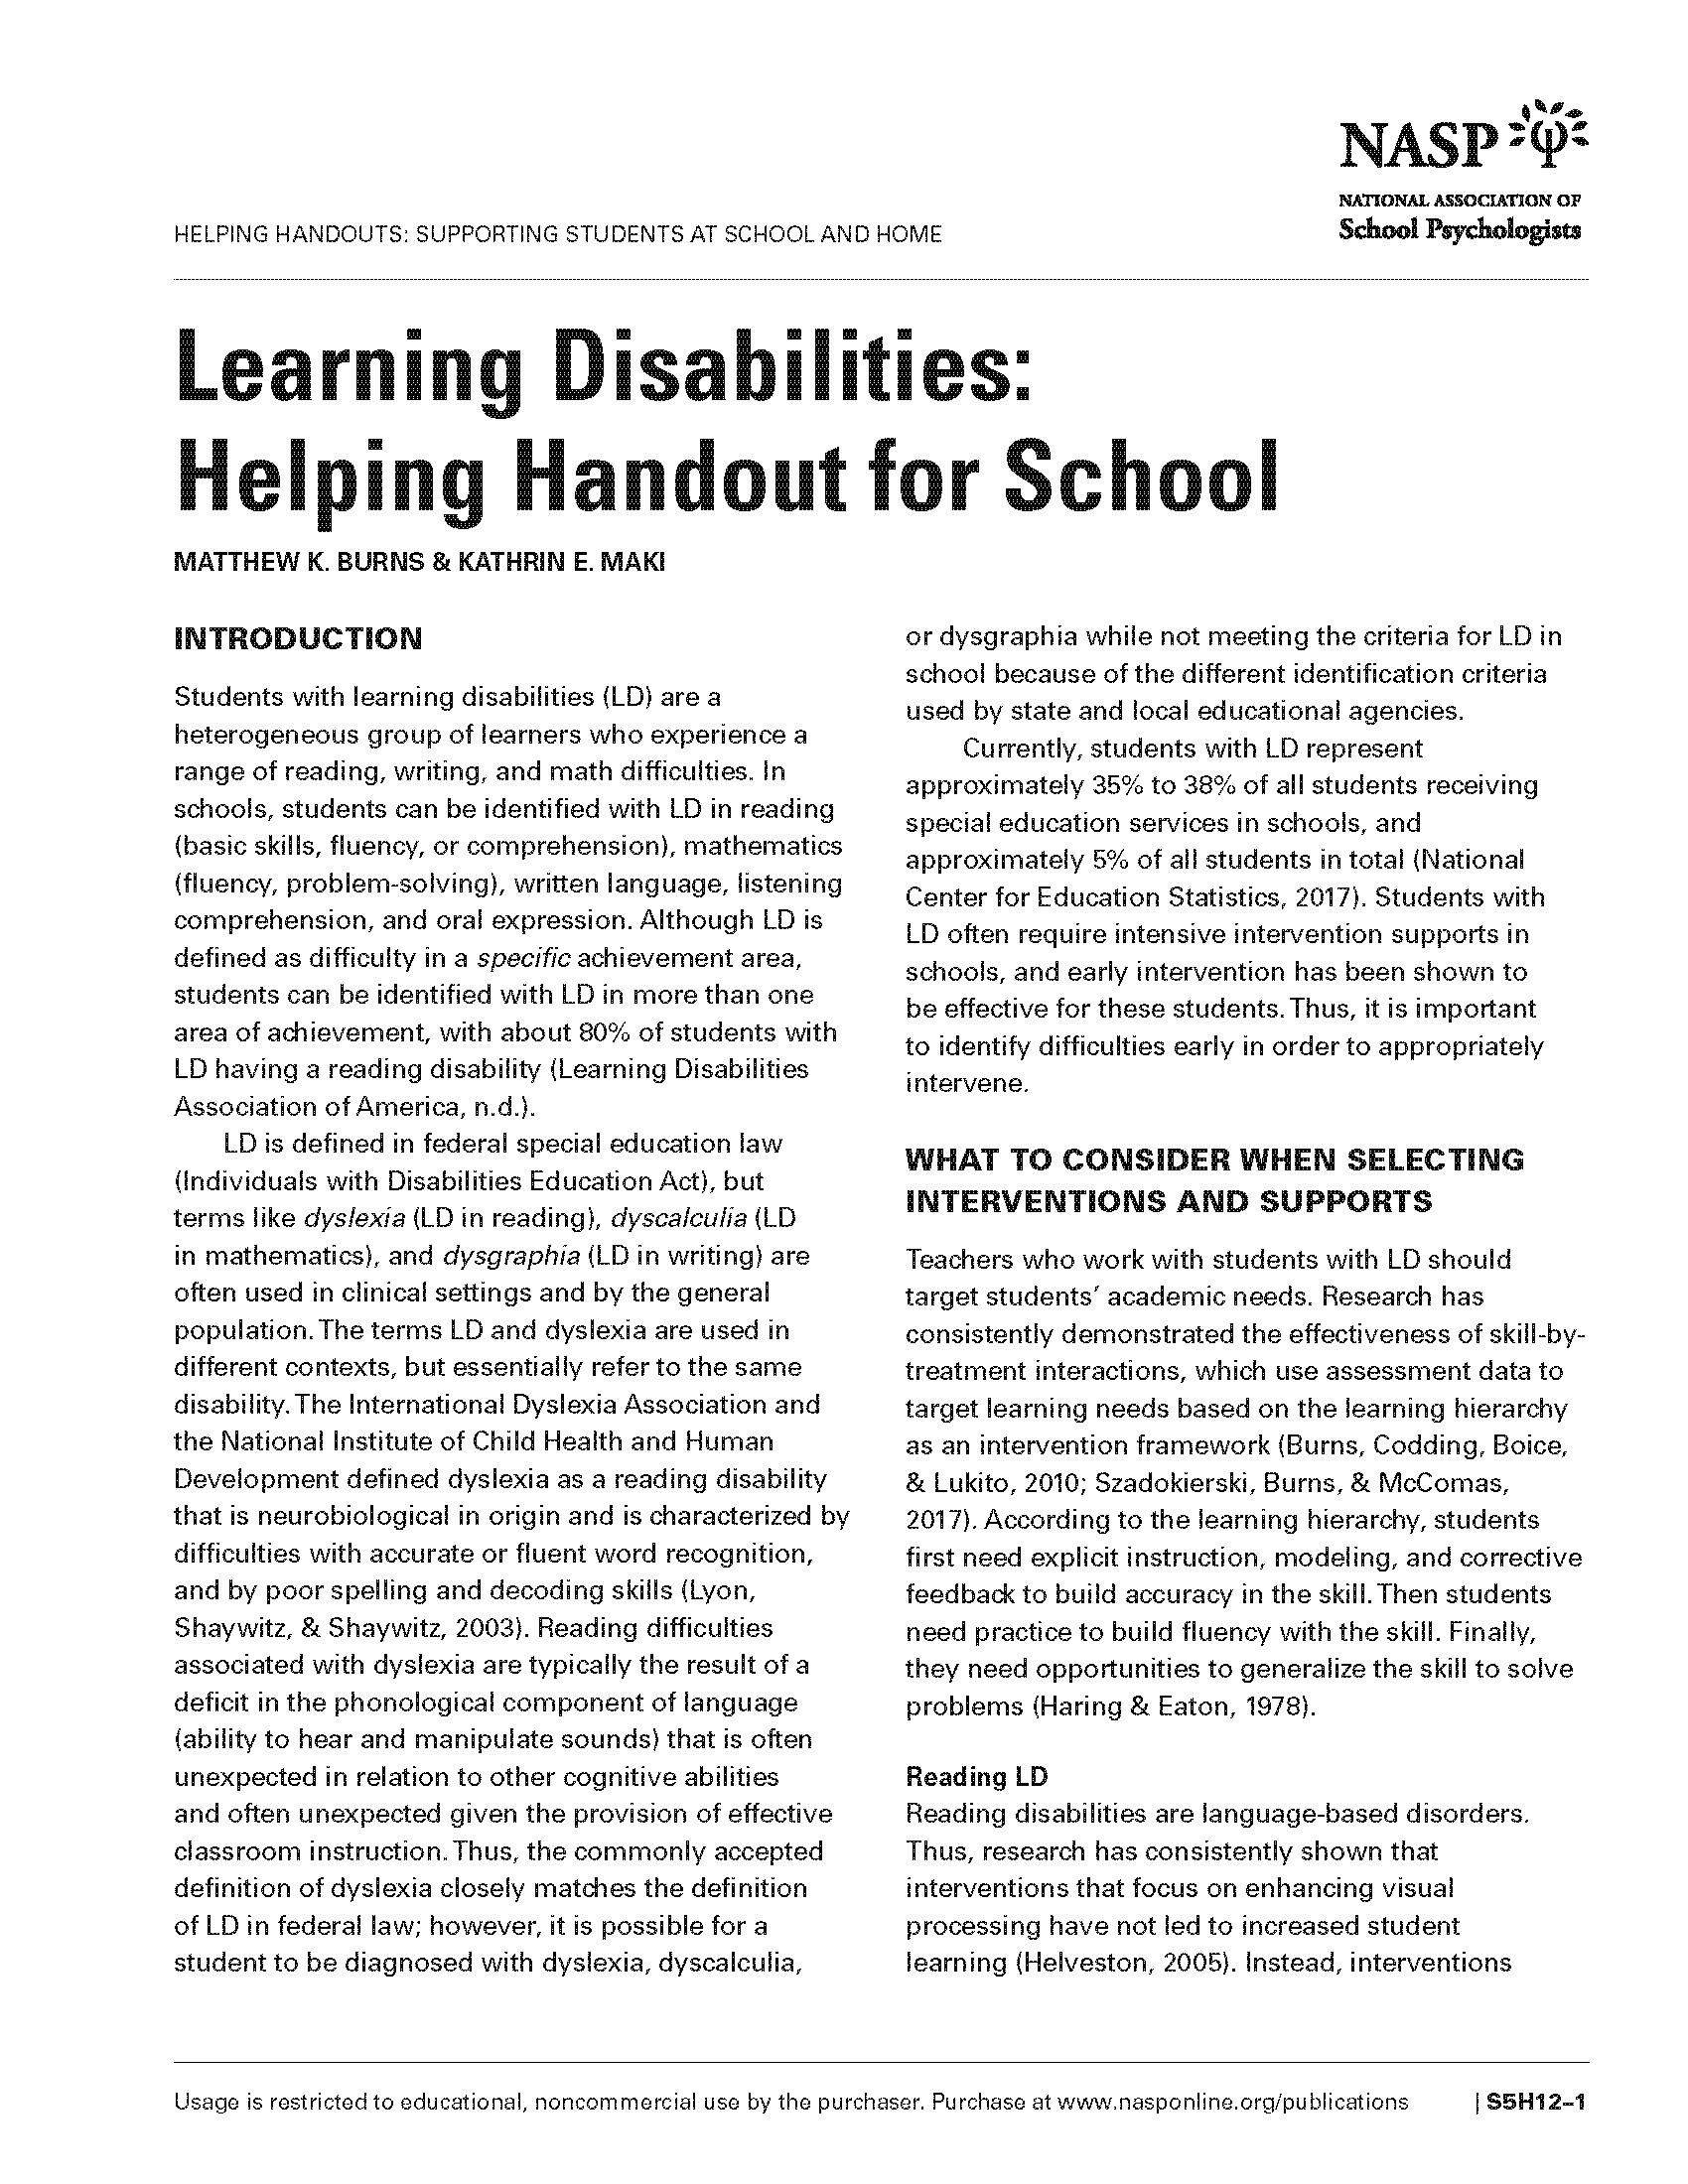 Specific Learning Disabilities: Helping Handout for School